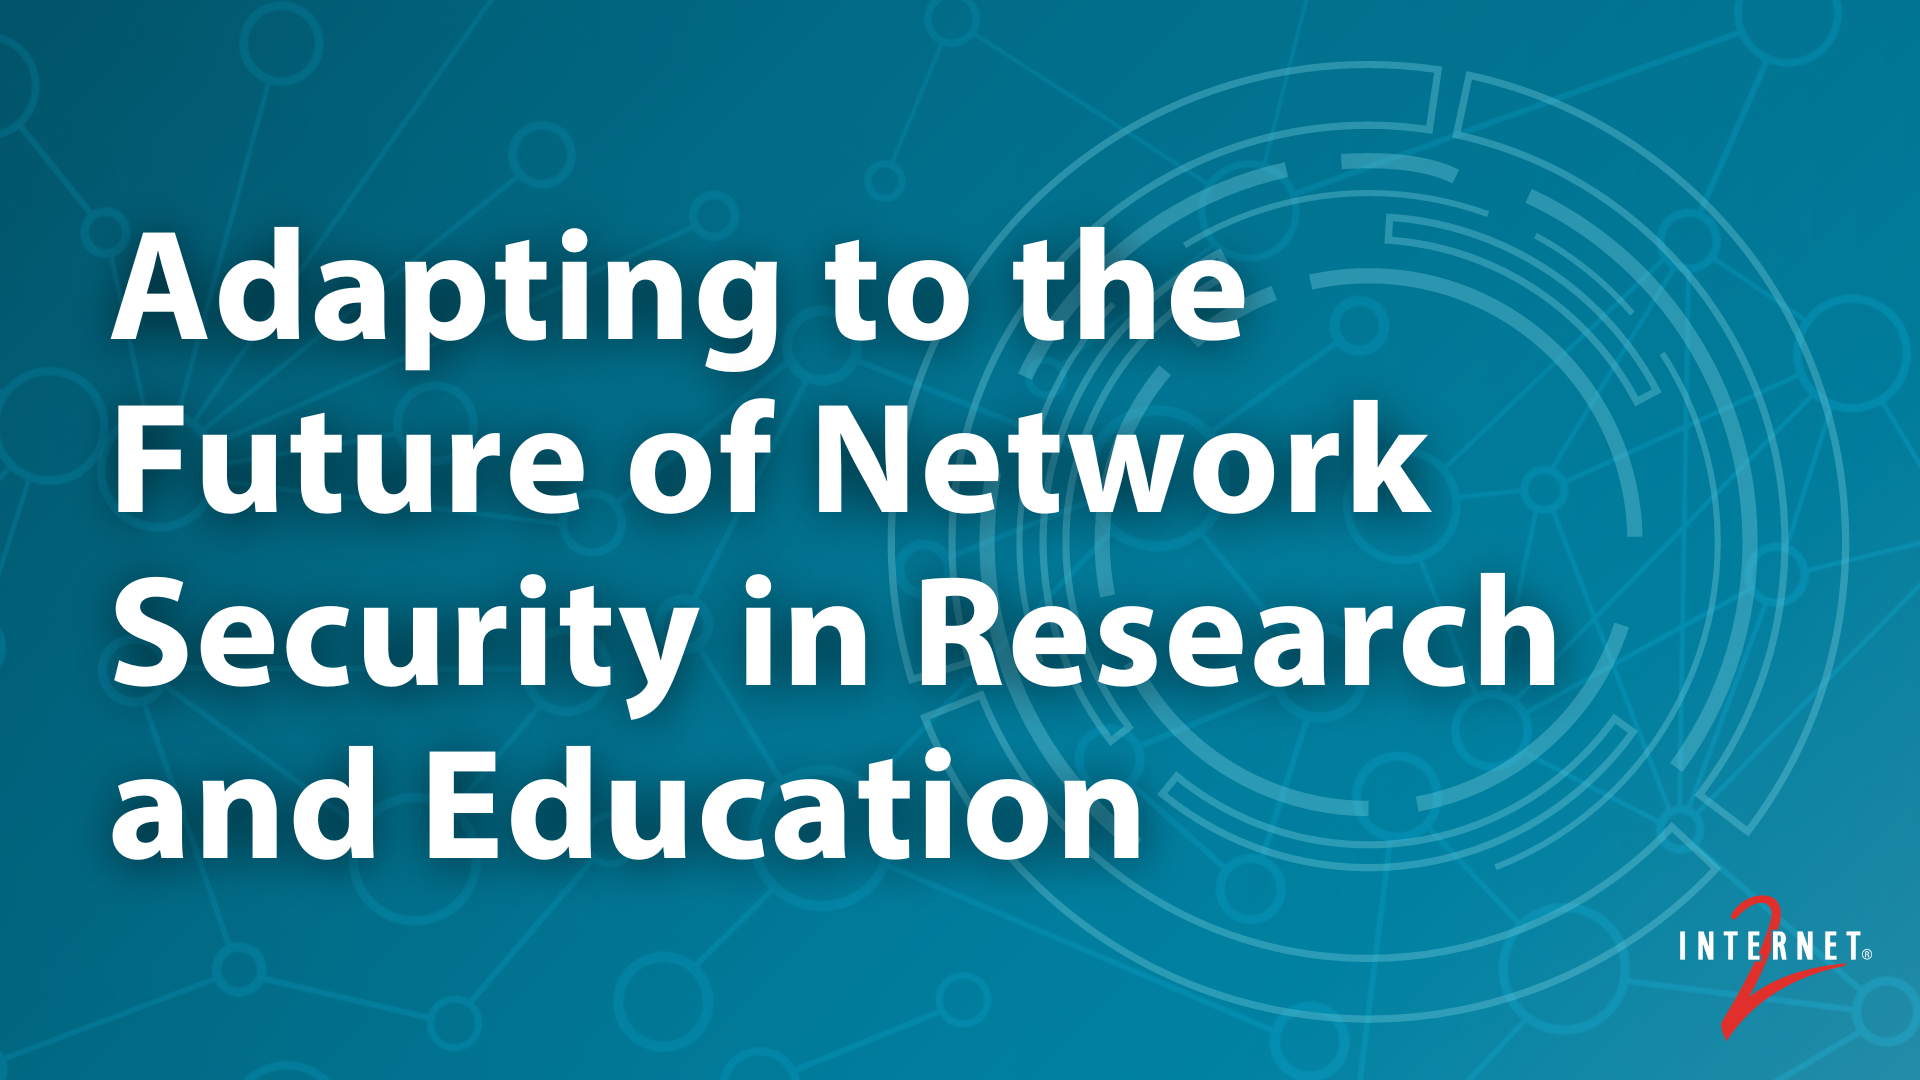 Adapting to the Future of Network Security in Research and Education